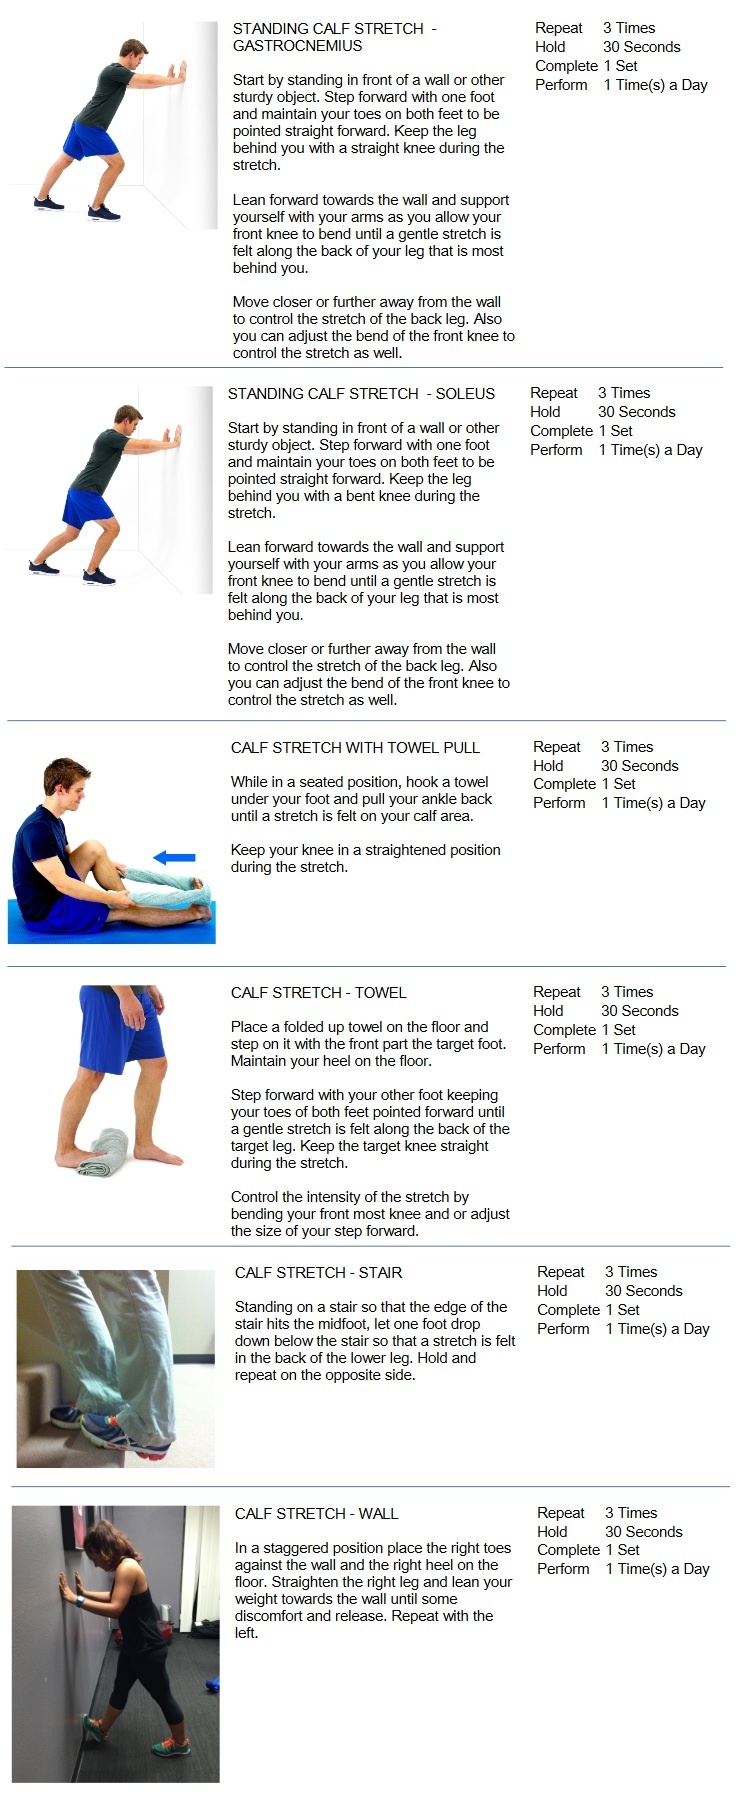 Calf Stretches - Active Chiropractic